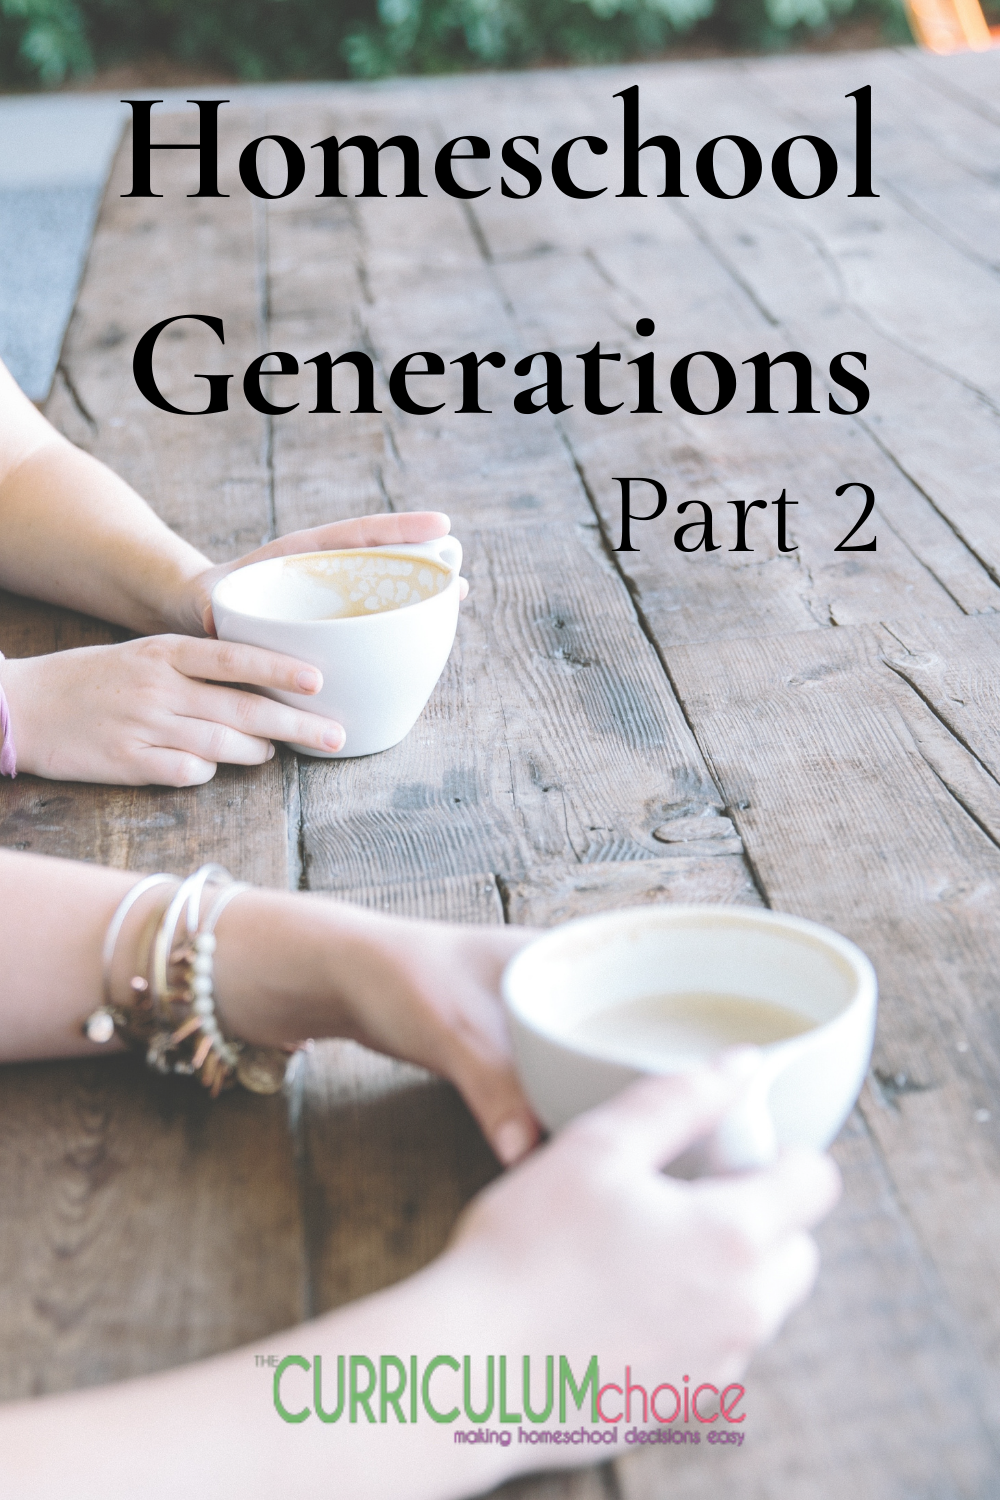 6 veteran homeschool moms join us to share their hard-earned wisdom in part 2 of the Homeschool Generations series at The Curriculum Choice. Learn and be encouraged!